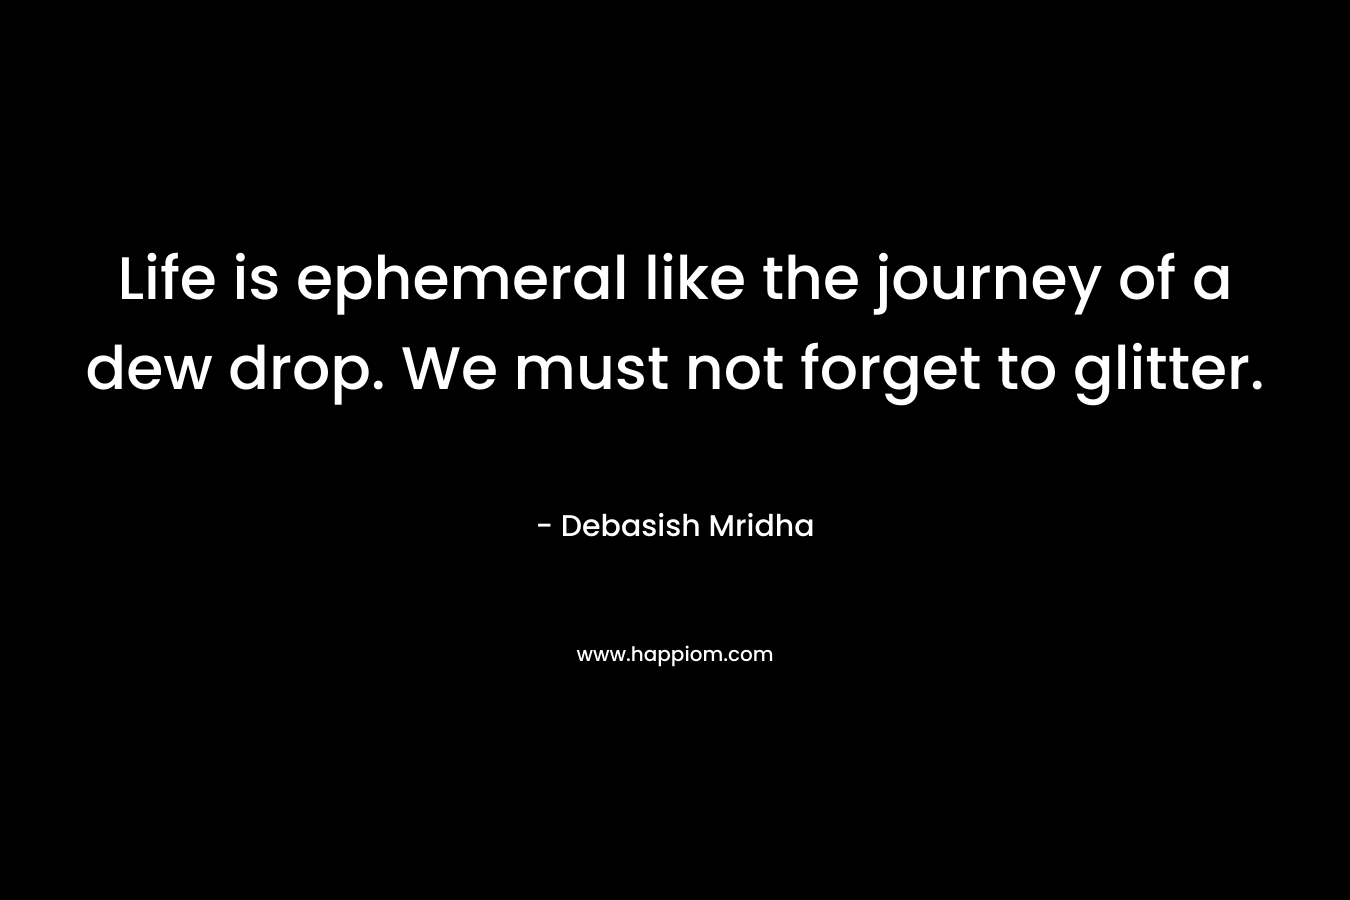 Life is ephemeral like the journey of a dew drop. We must not forget to glitter.